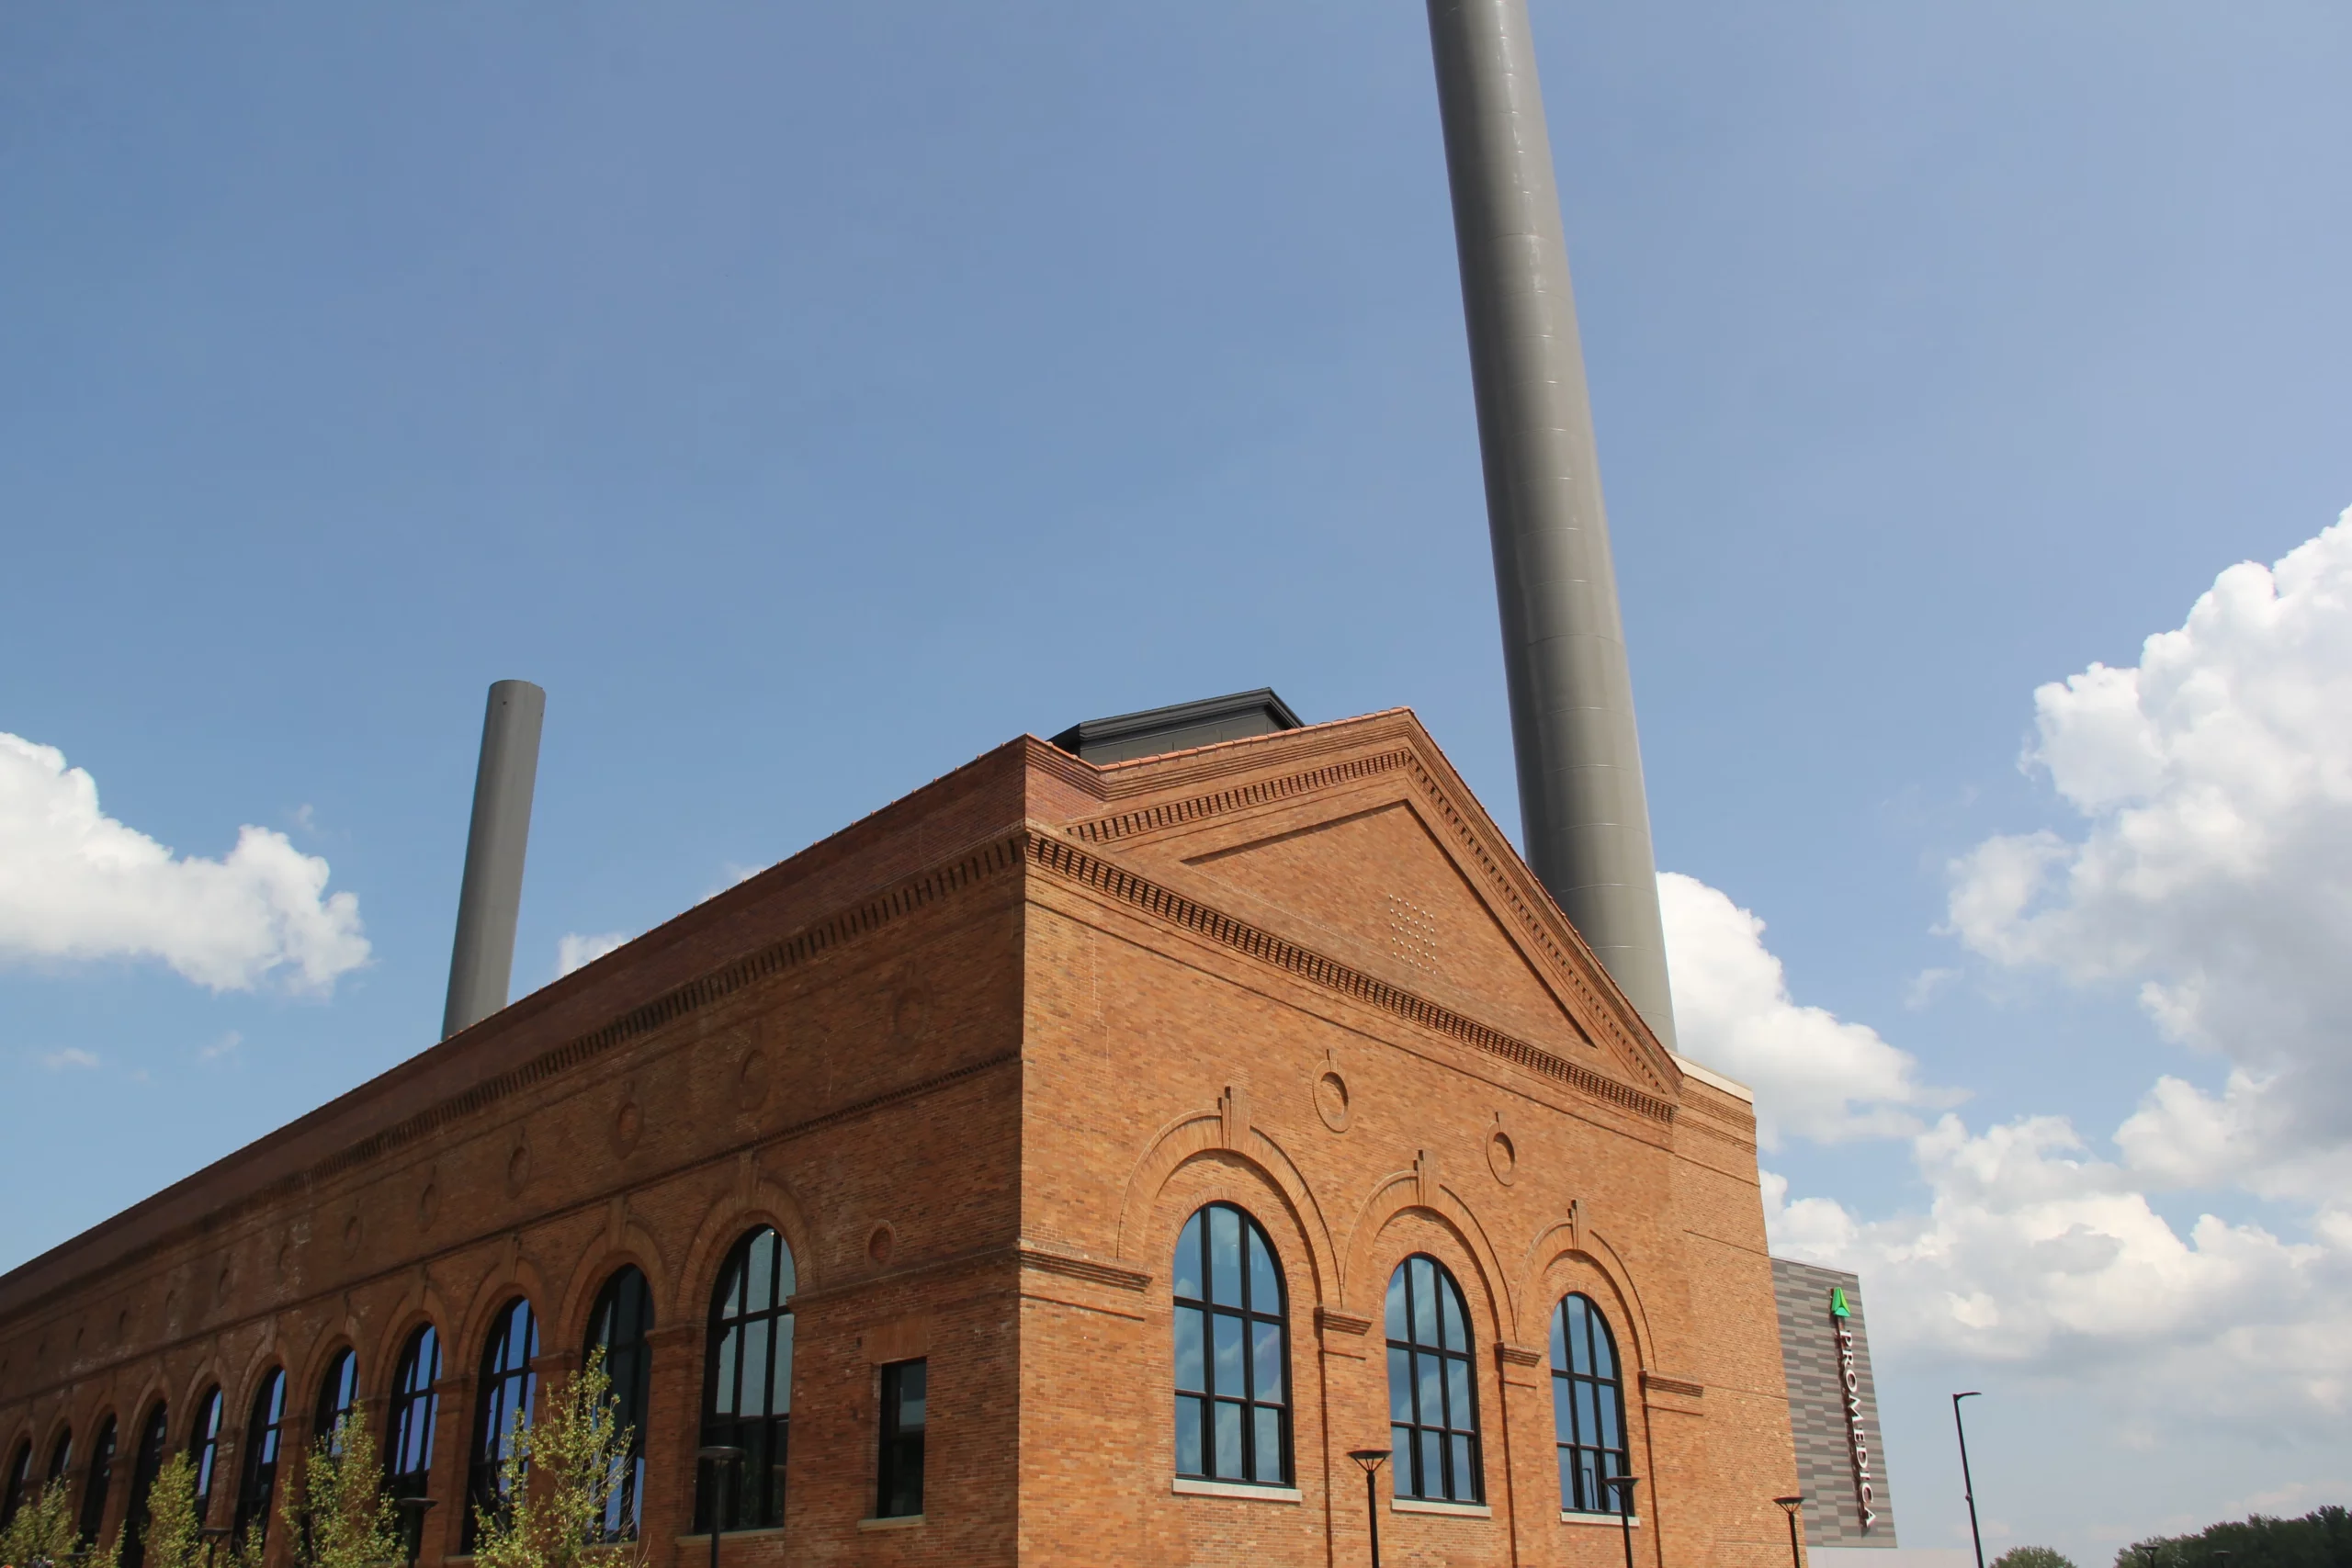 The Steam Plant